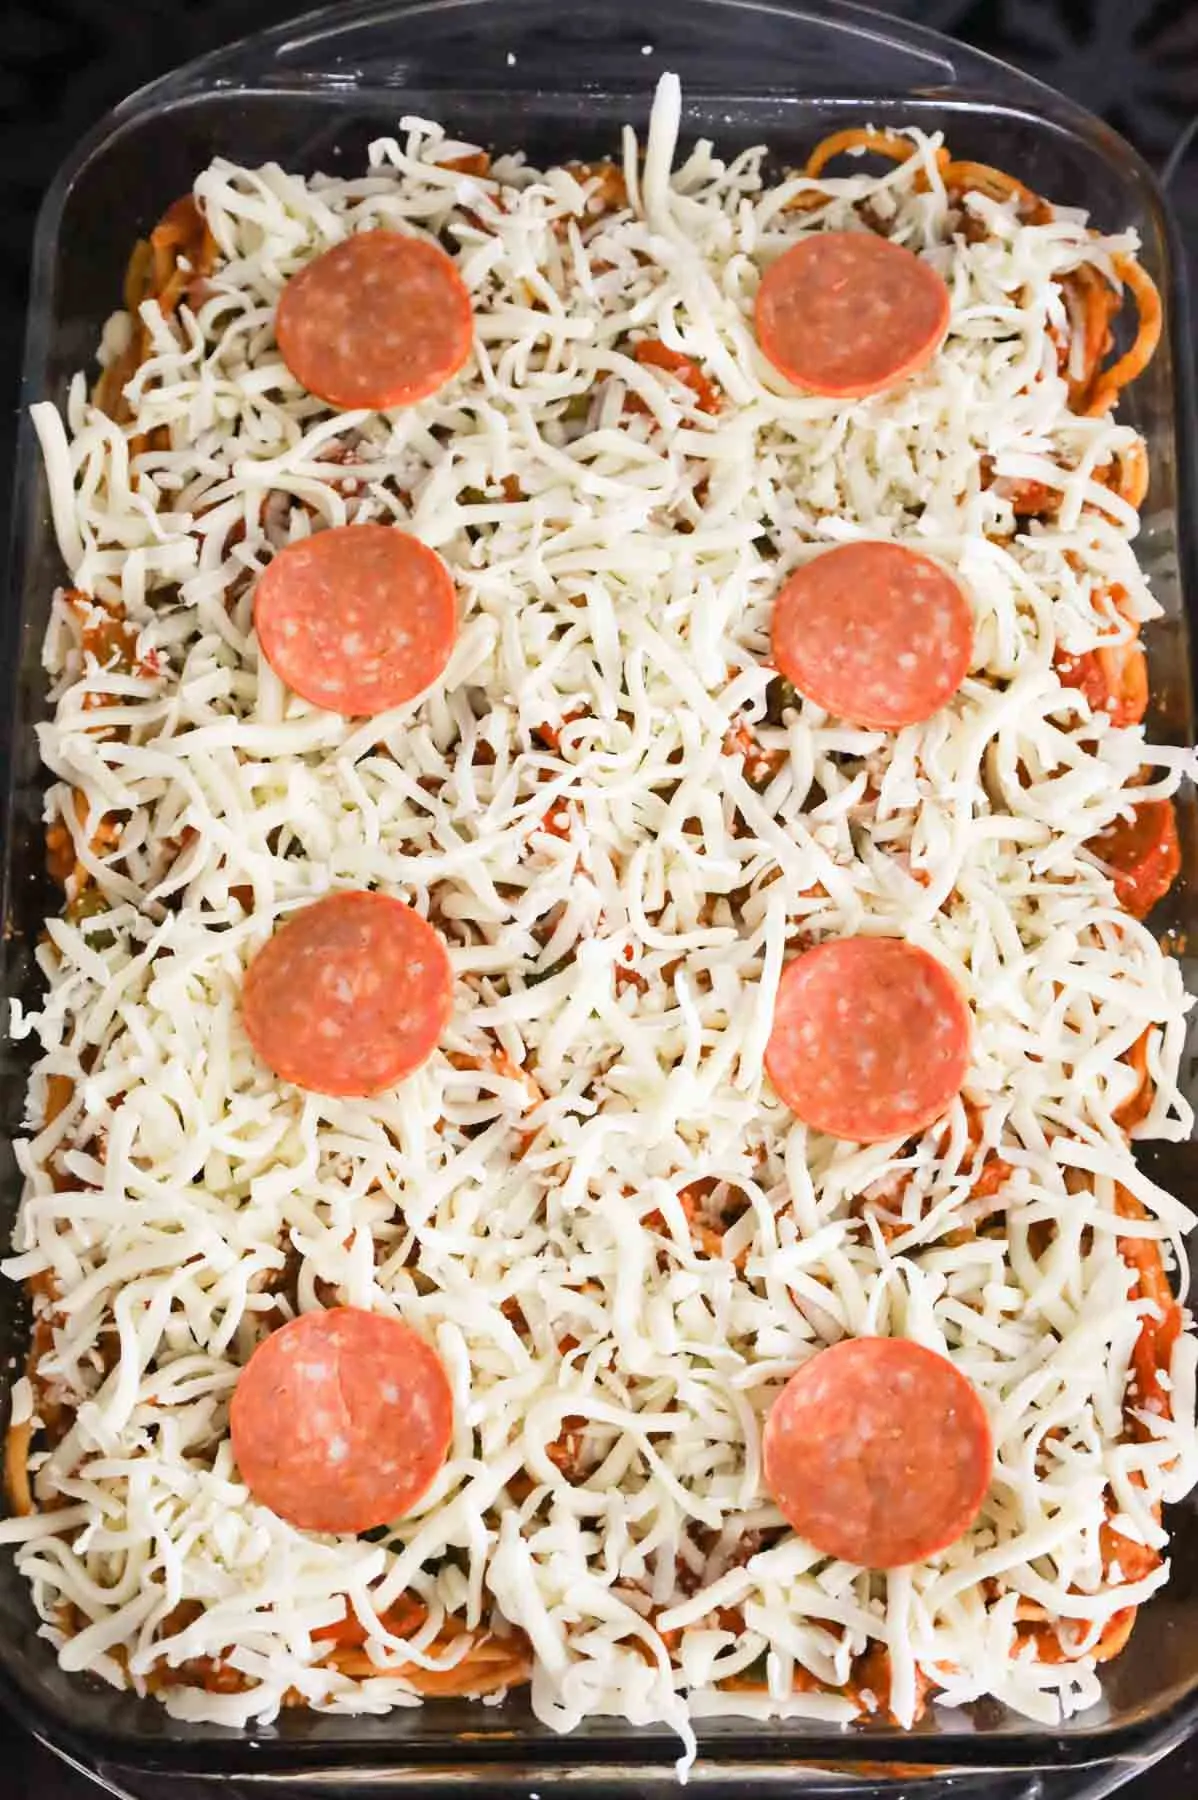 pepperoni slices on top of shredded mozzarella cheese and spaghetti in a baking dish